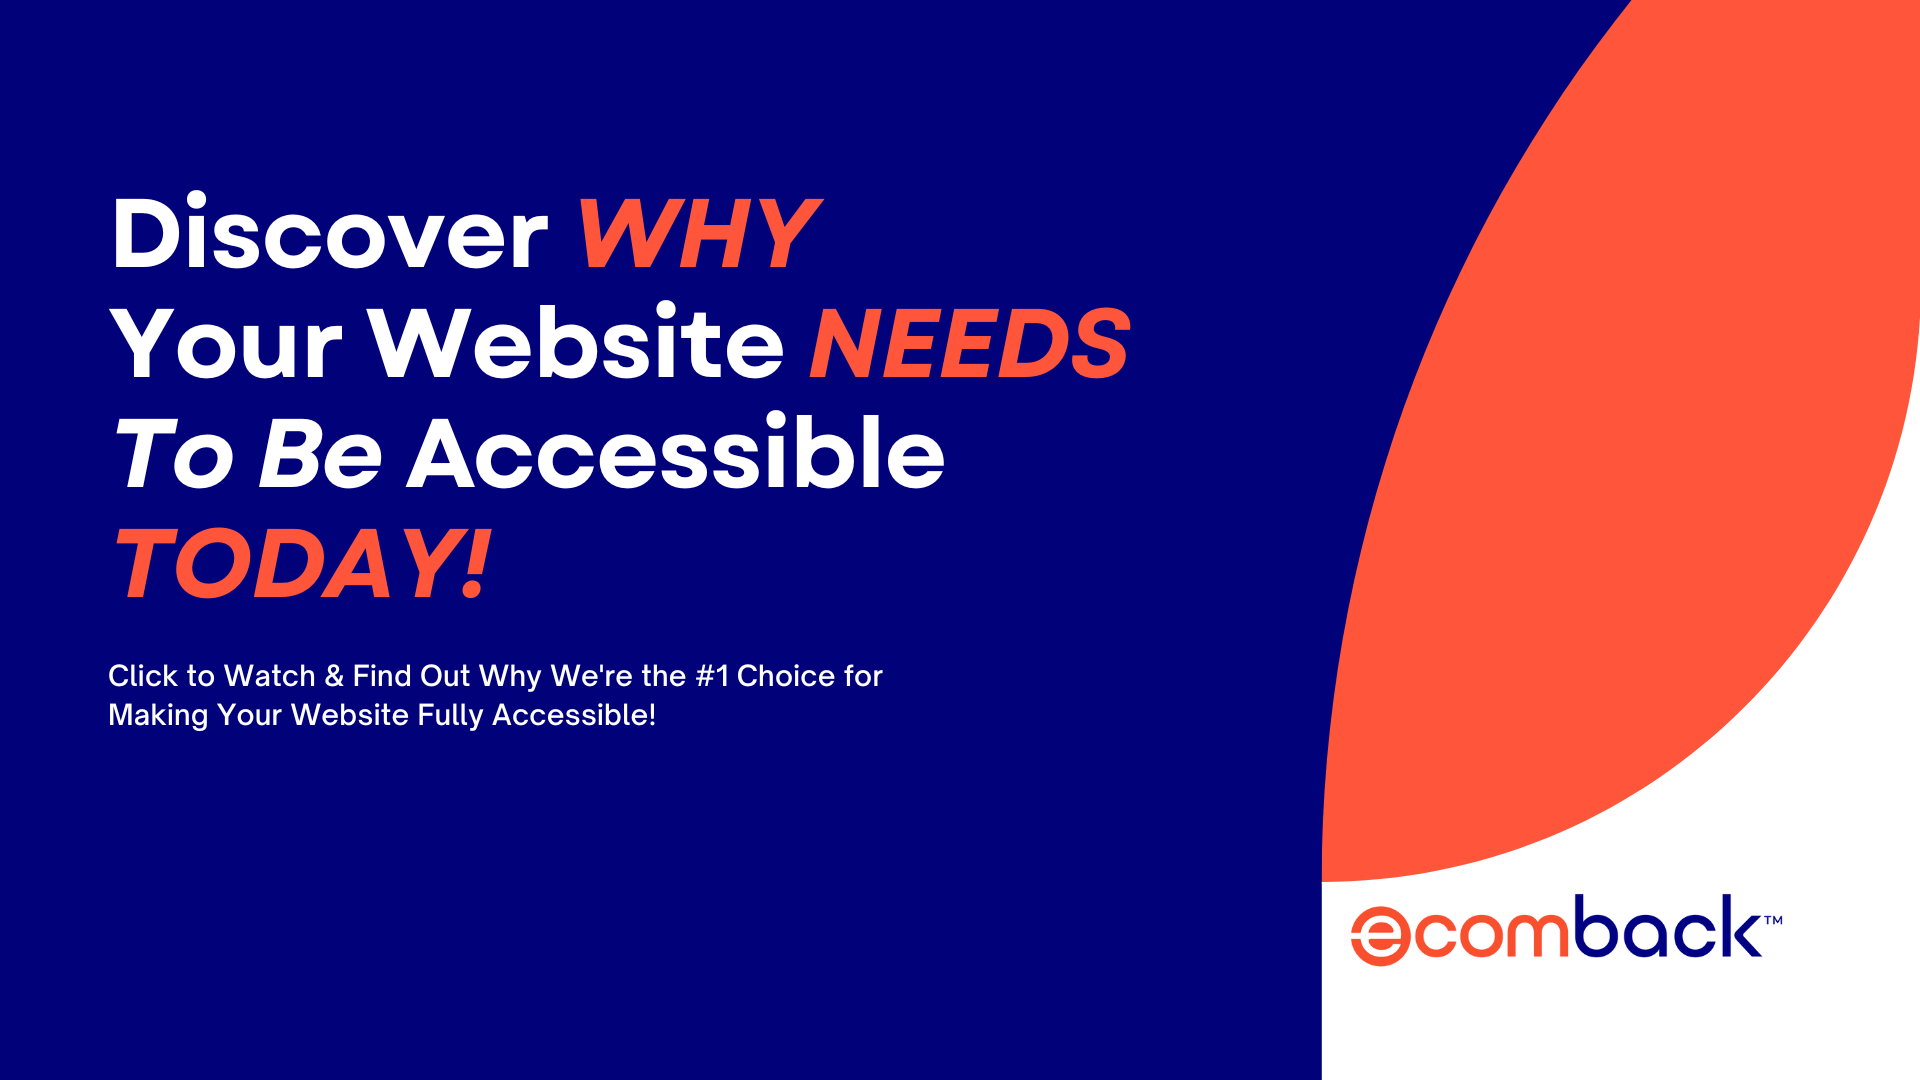 Discover why your website needs to be accessible today! click to watch and found out why we are the number one choice for making your website fully accessible.